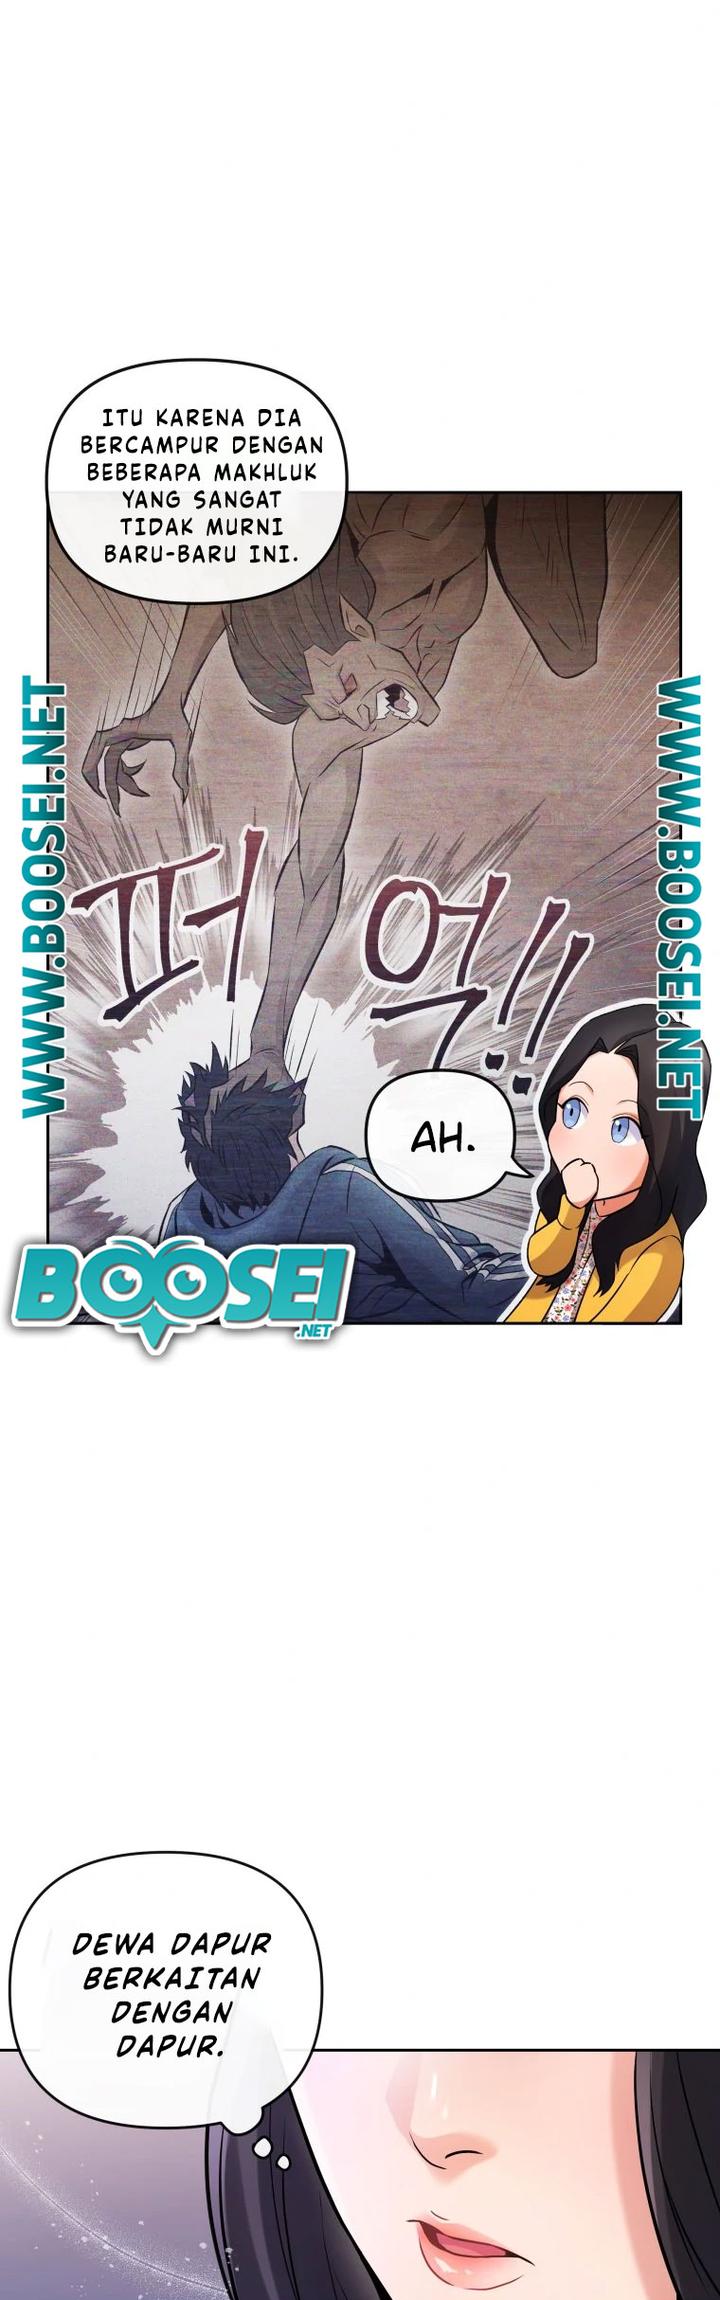 A Grandcross Story Chapter 08 29